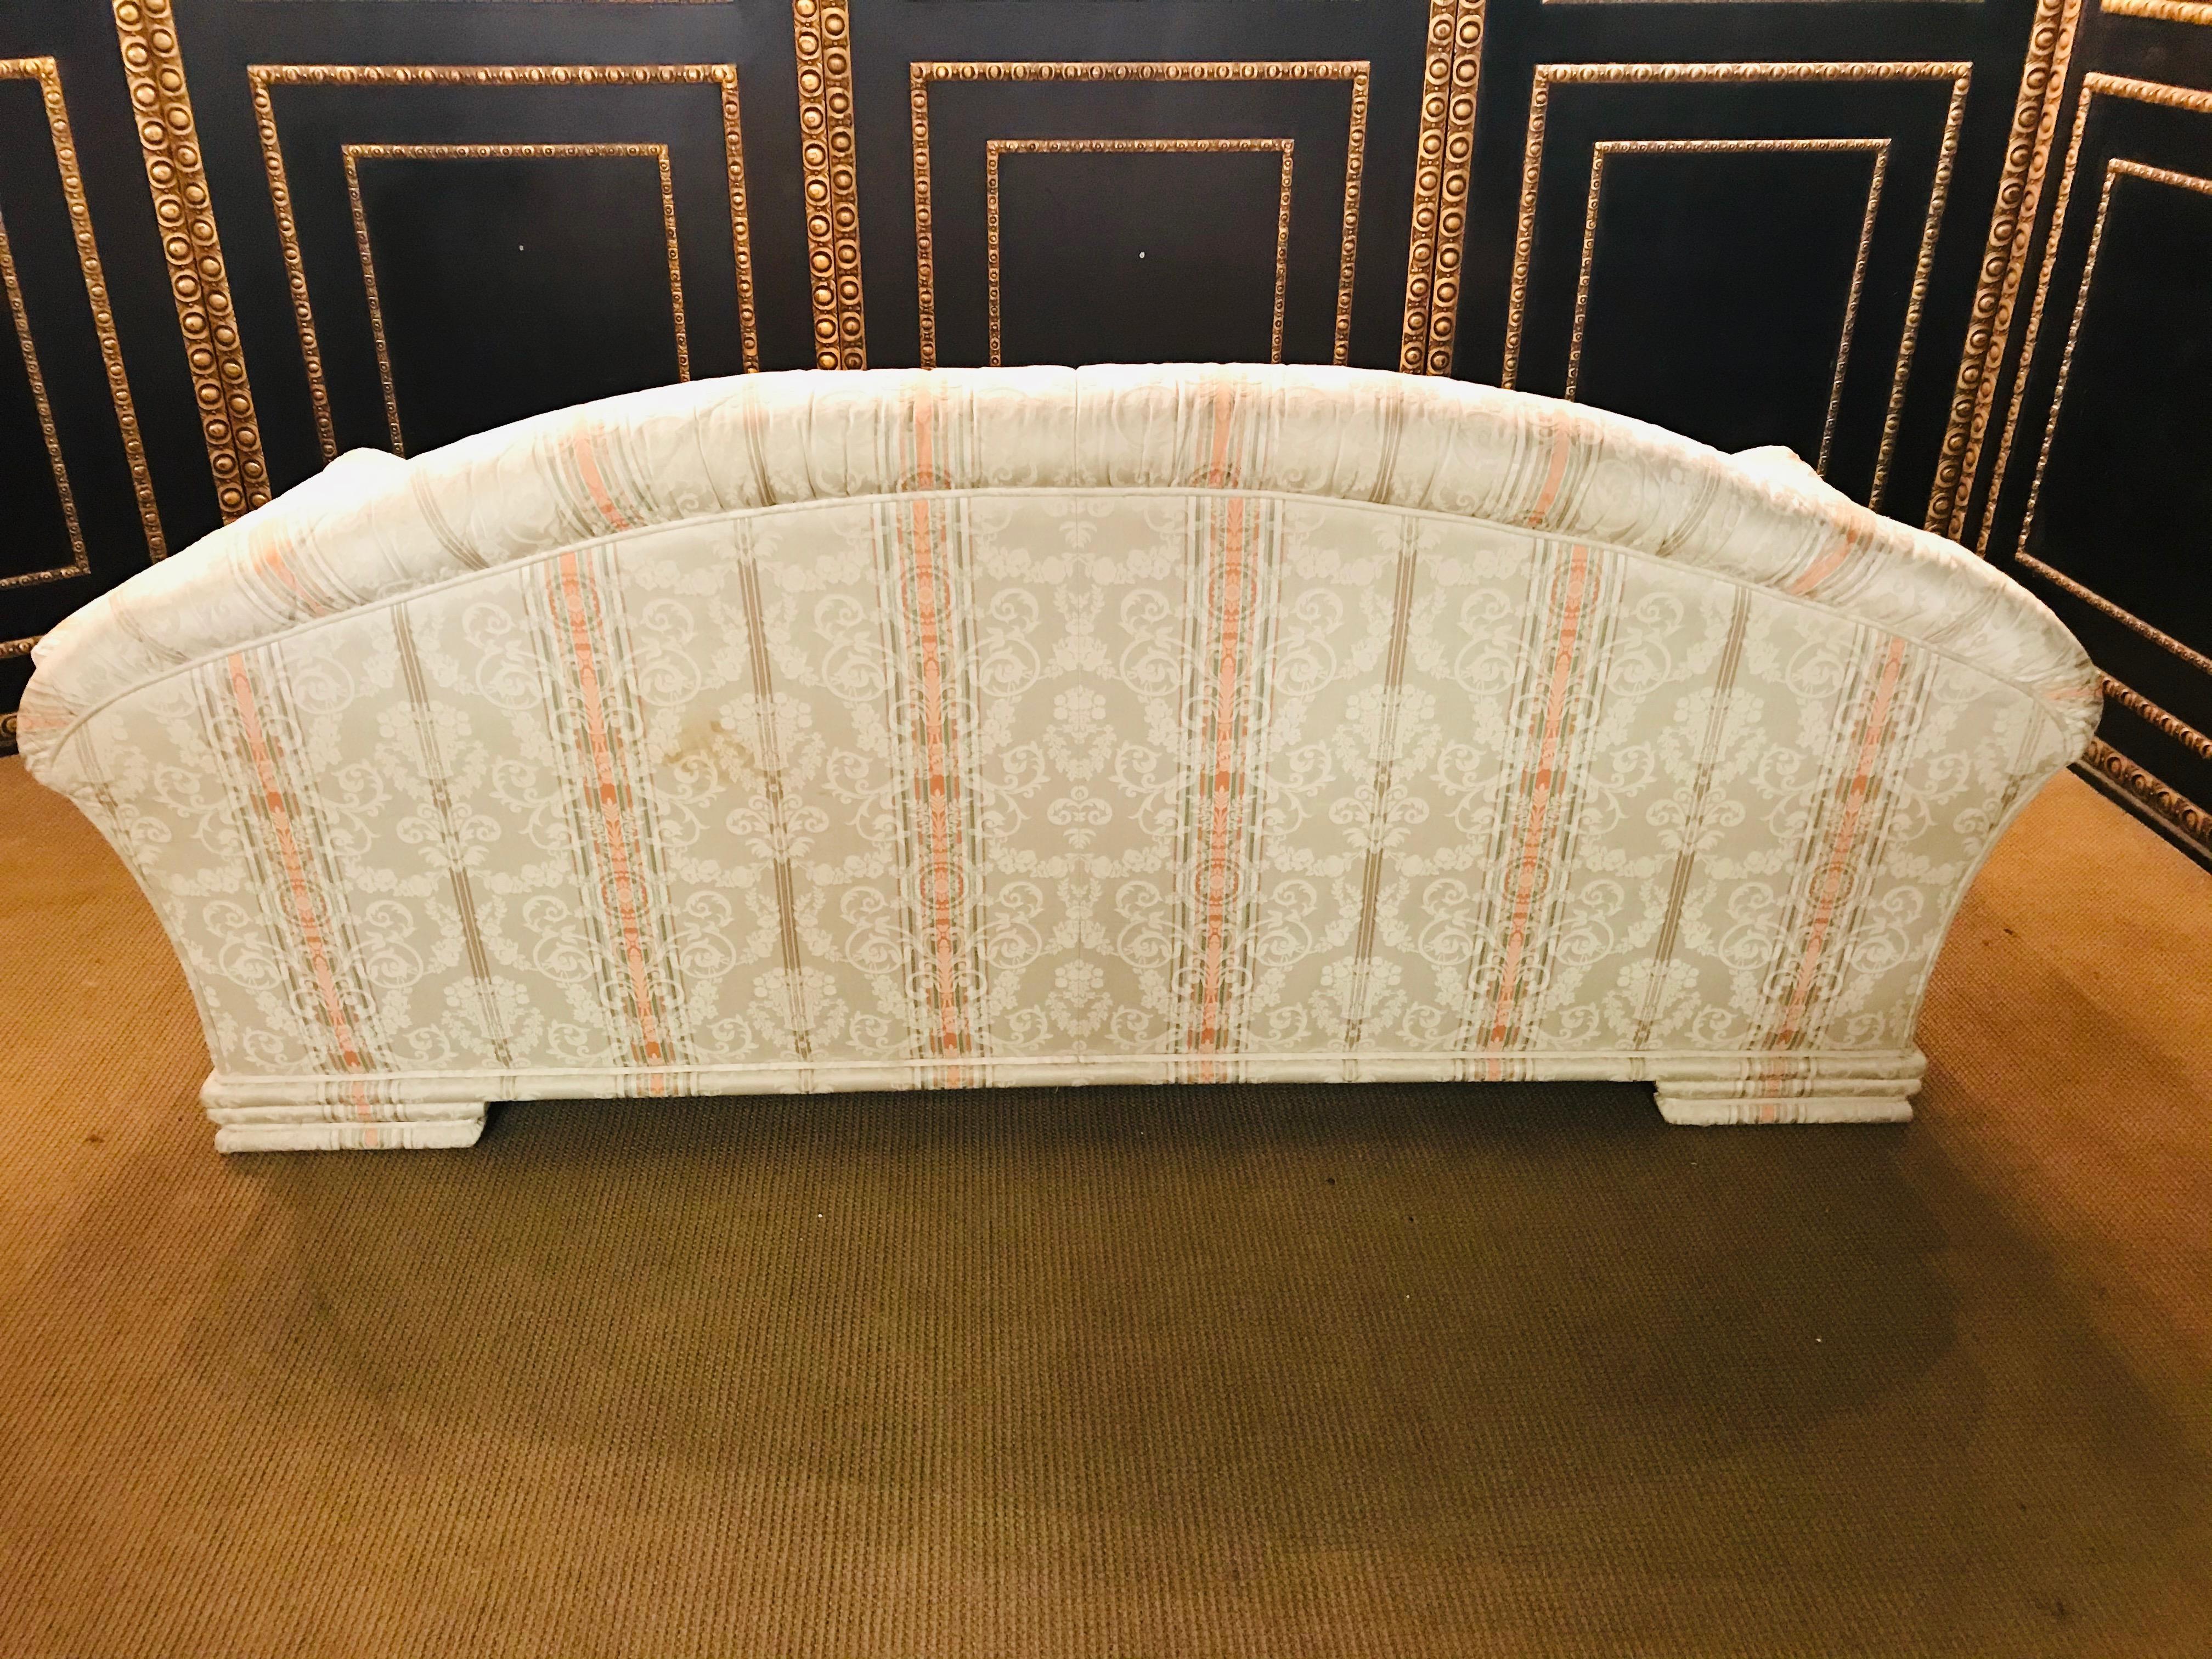 Very High-Quality Couch Set from the Bielefeld Workshops with Baroque Patterns 5